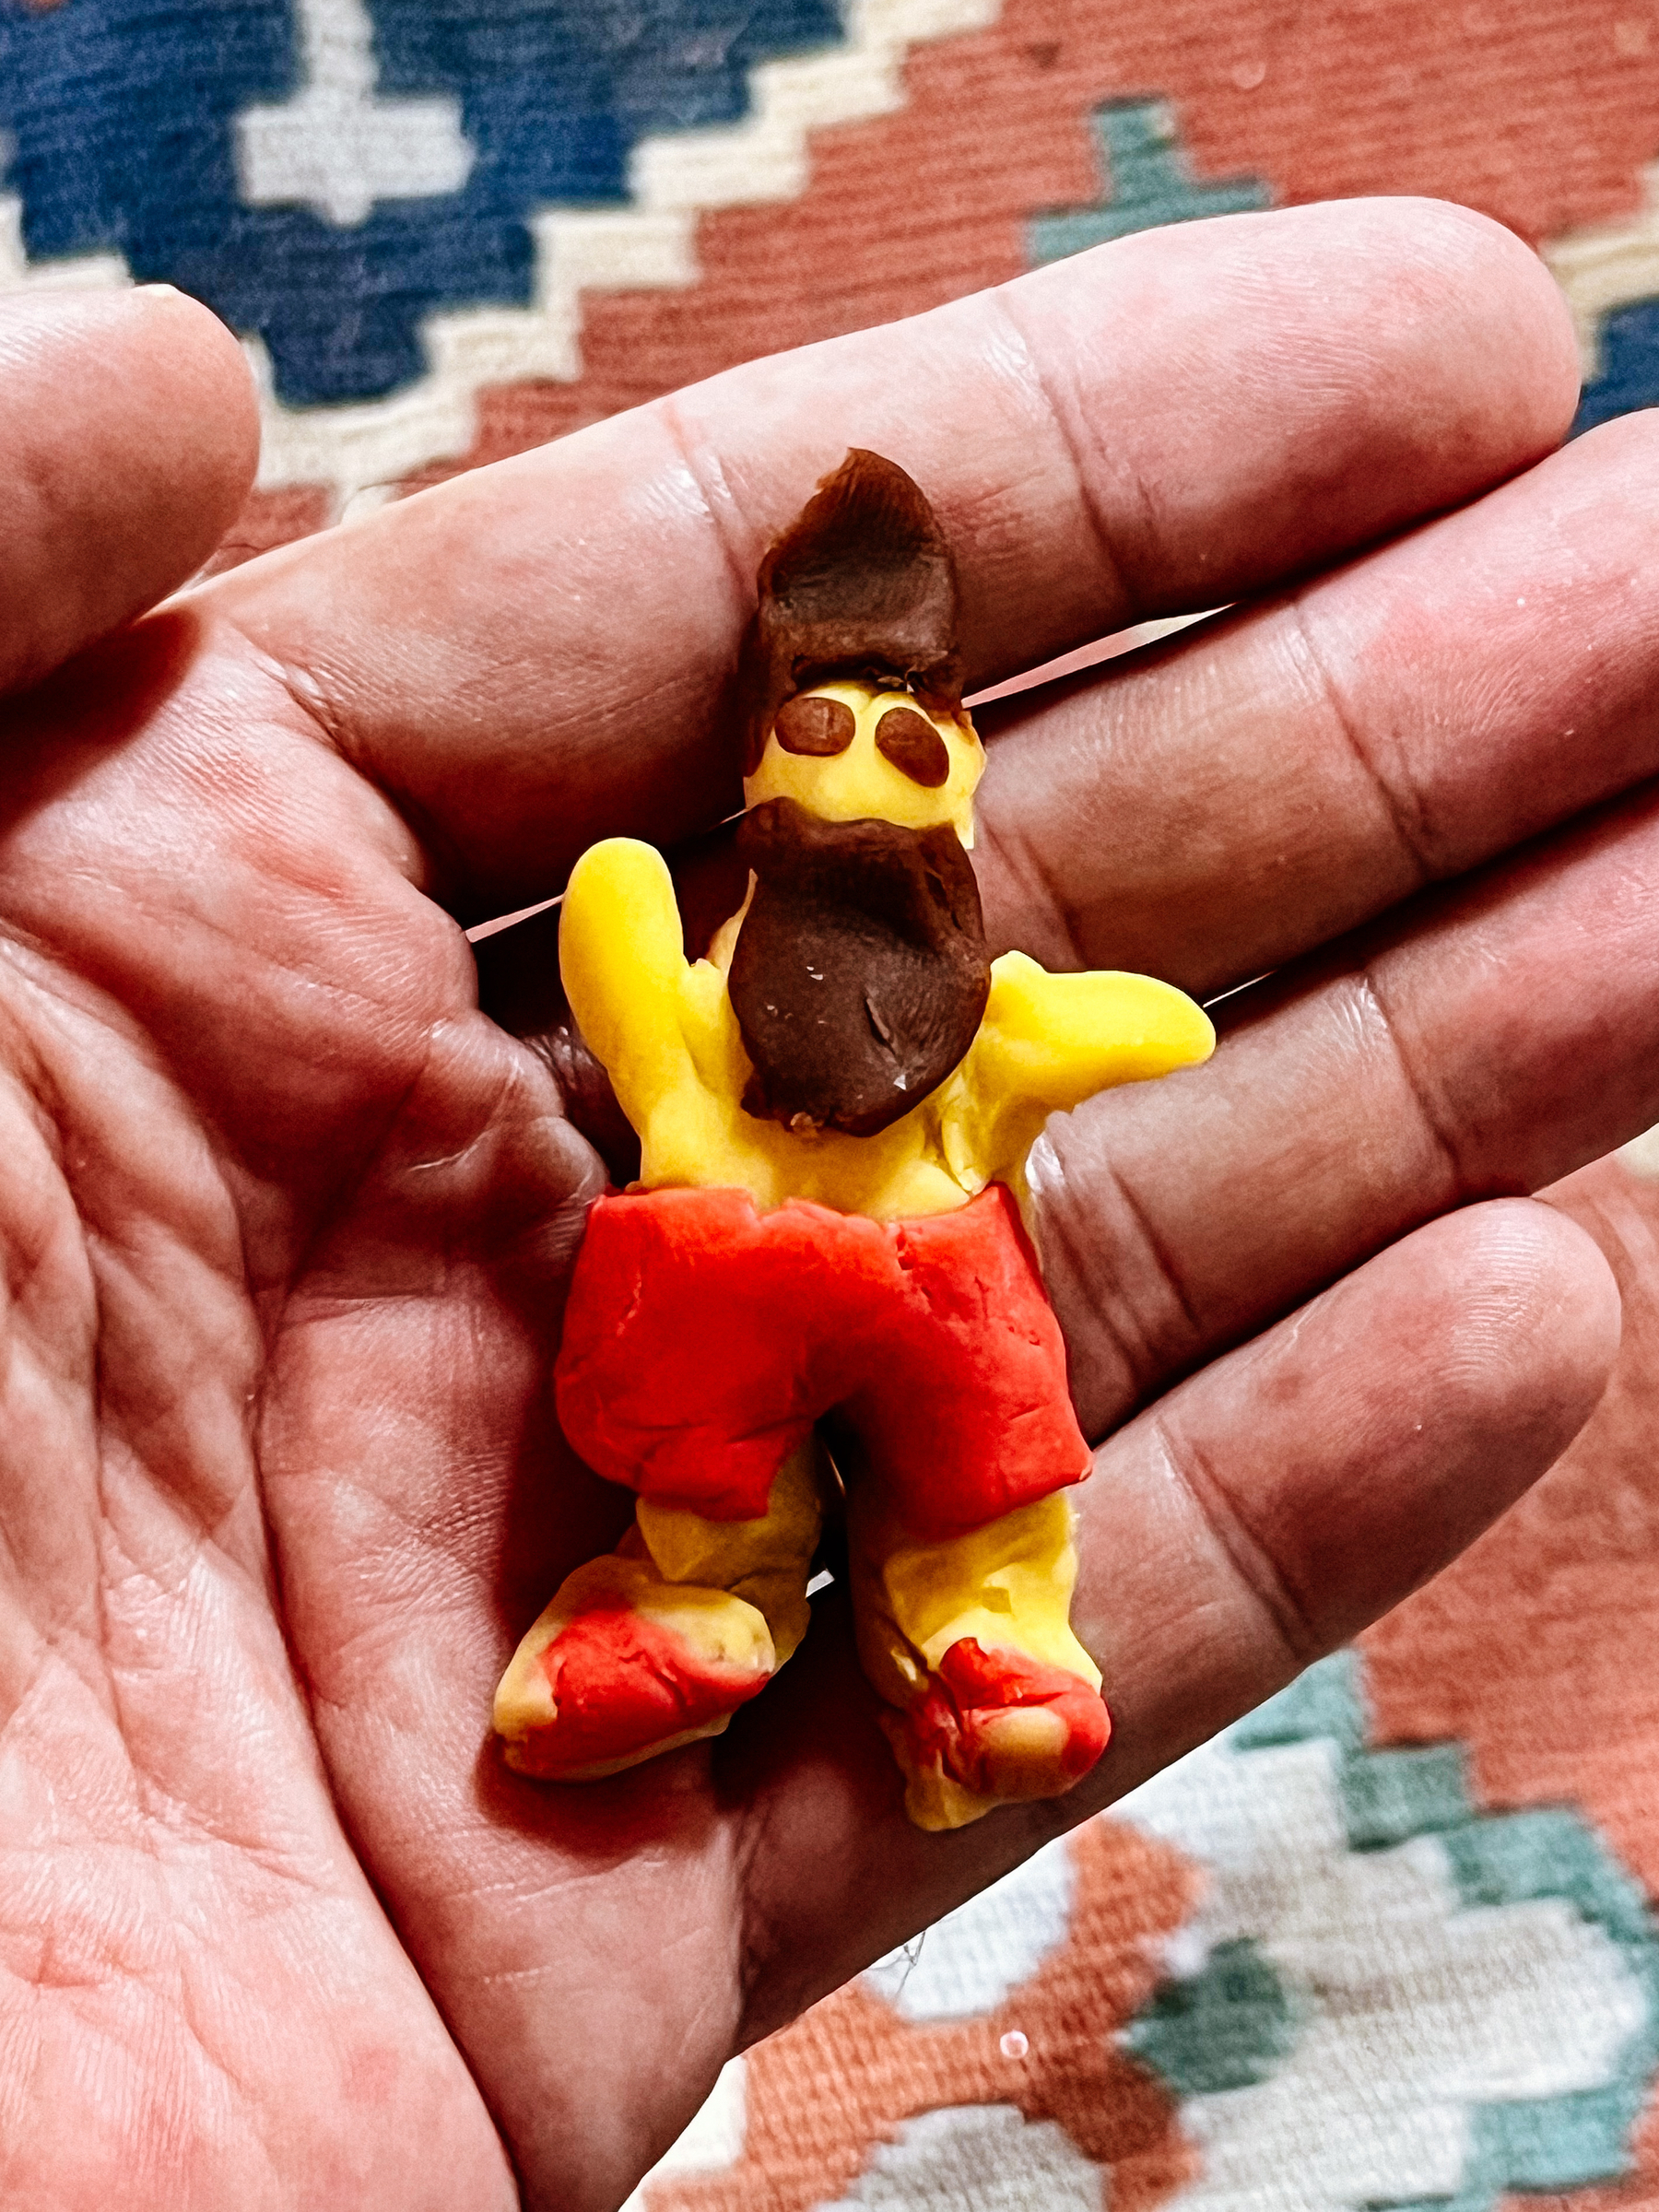 A man made of Play-Doh. 